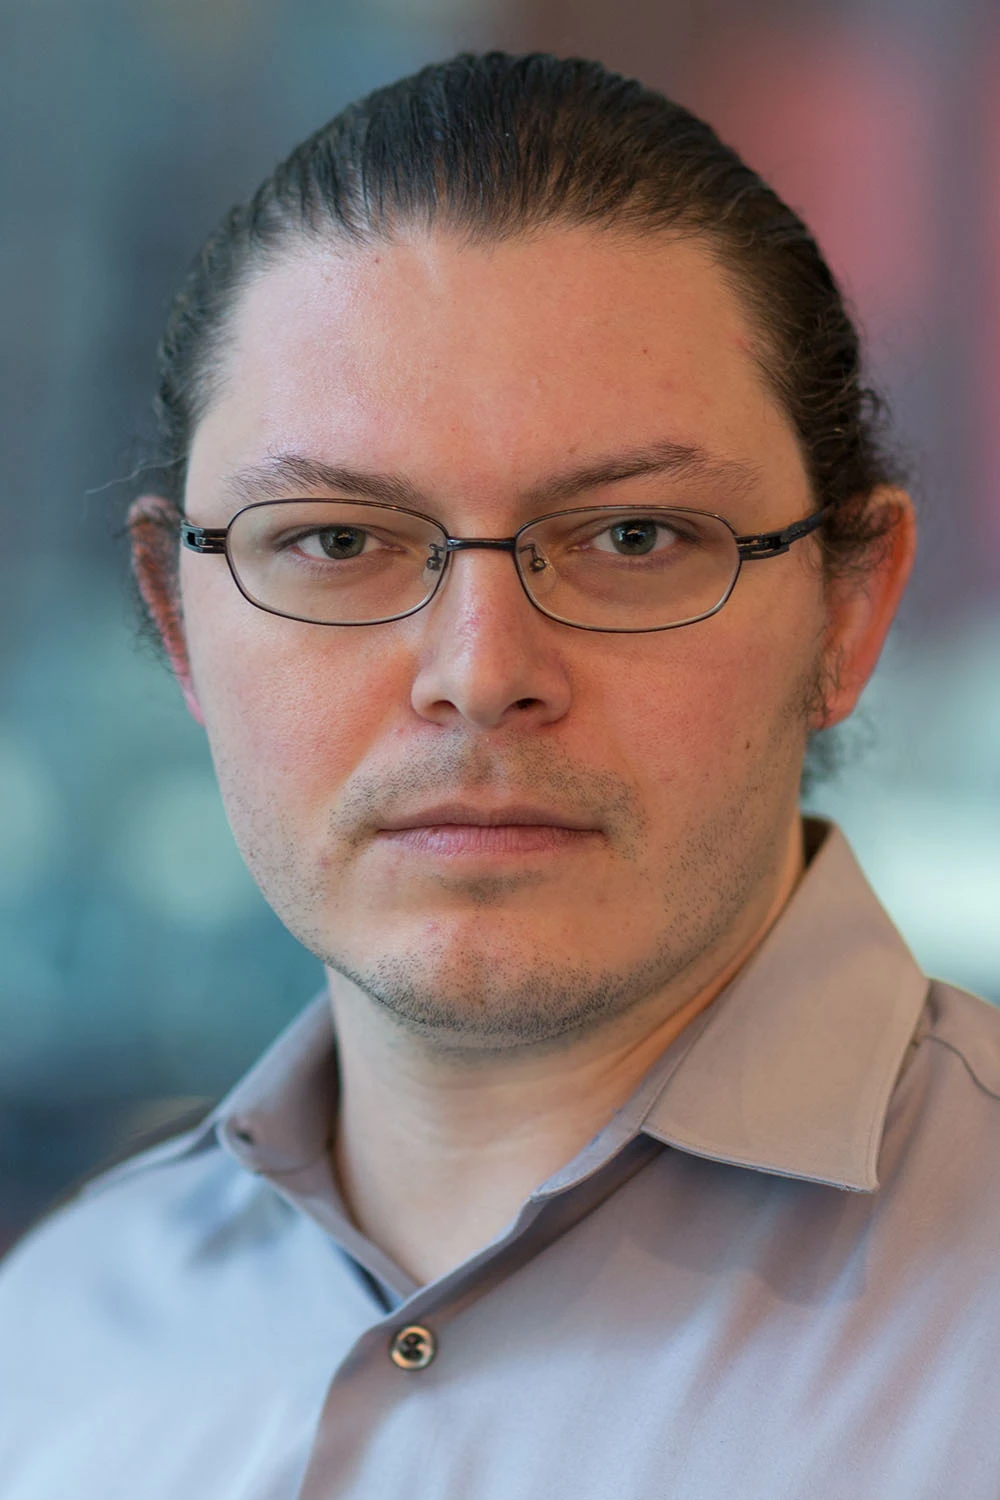 Gary Kazantsev poses for a headshot. He is a white male with thin-rimmed glasses, long hair pulled back, and wearing a gray collared shirt.